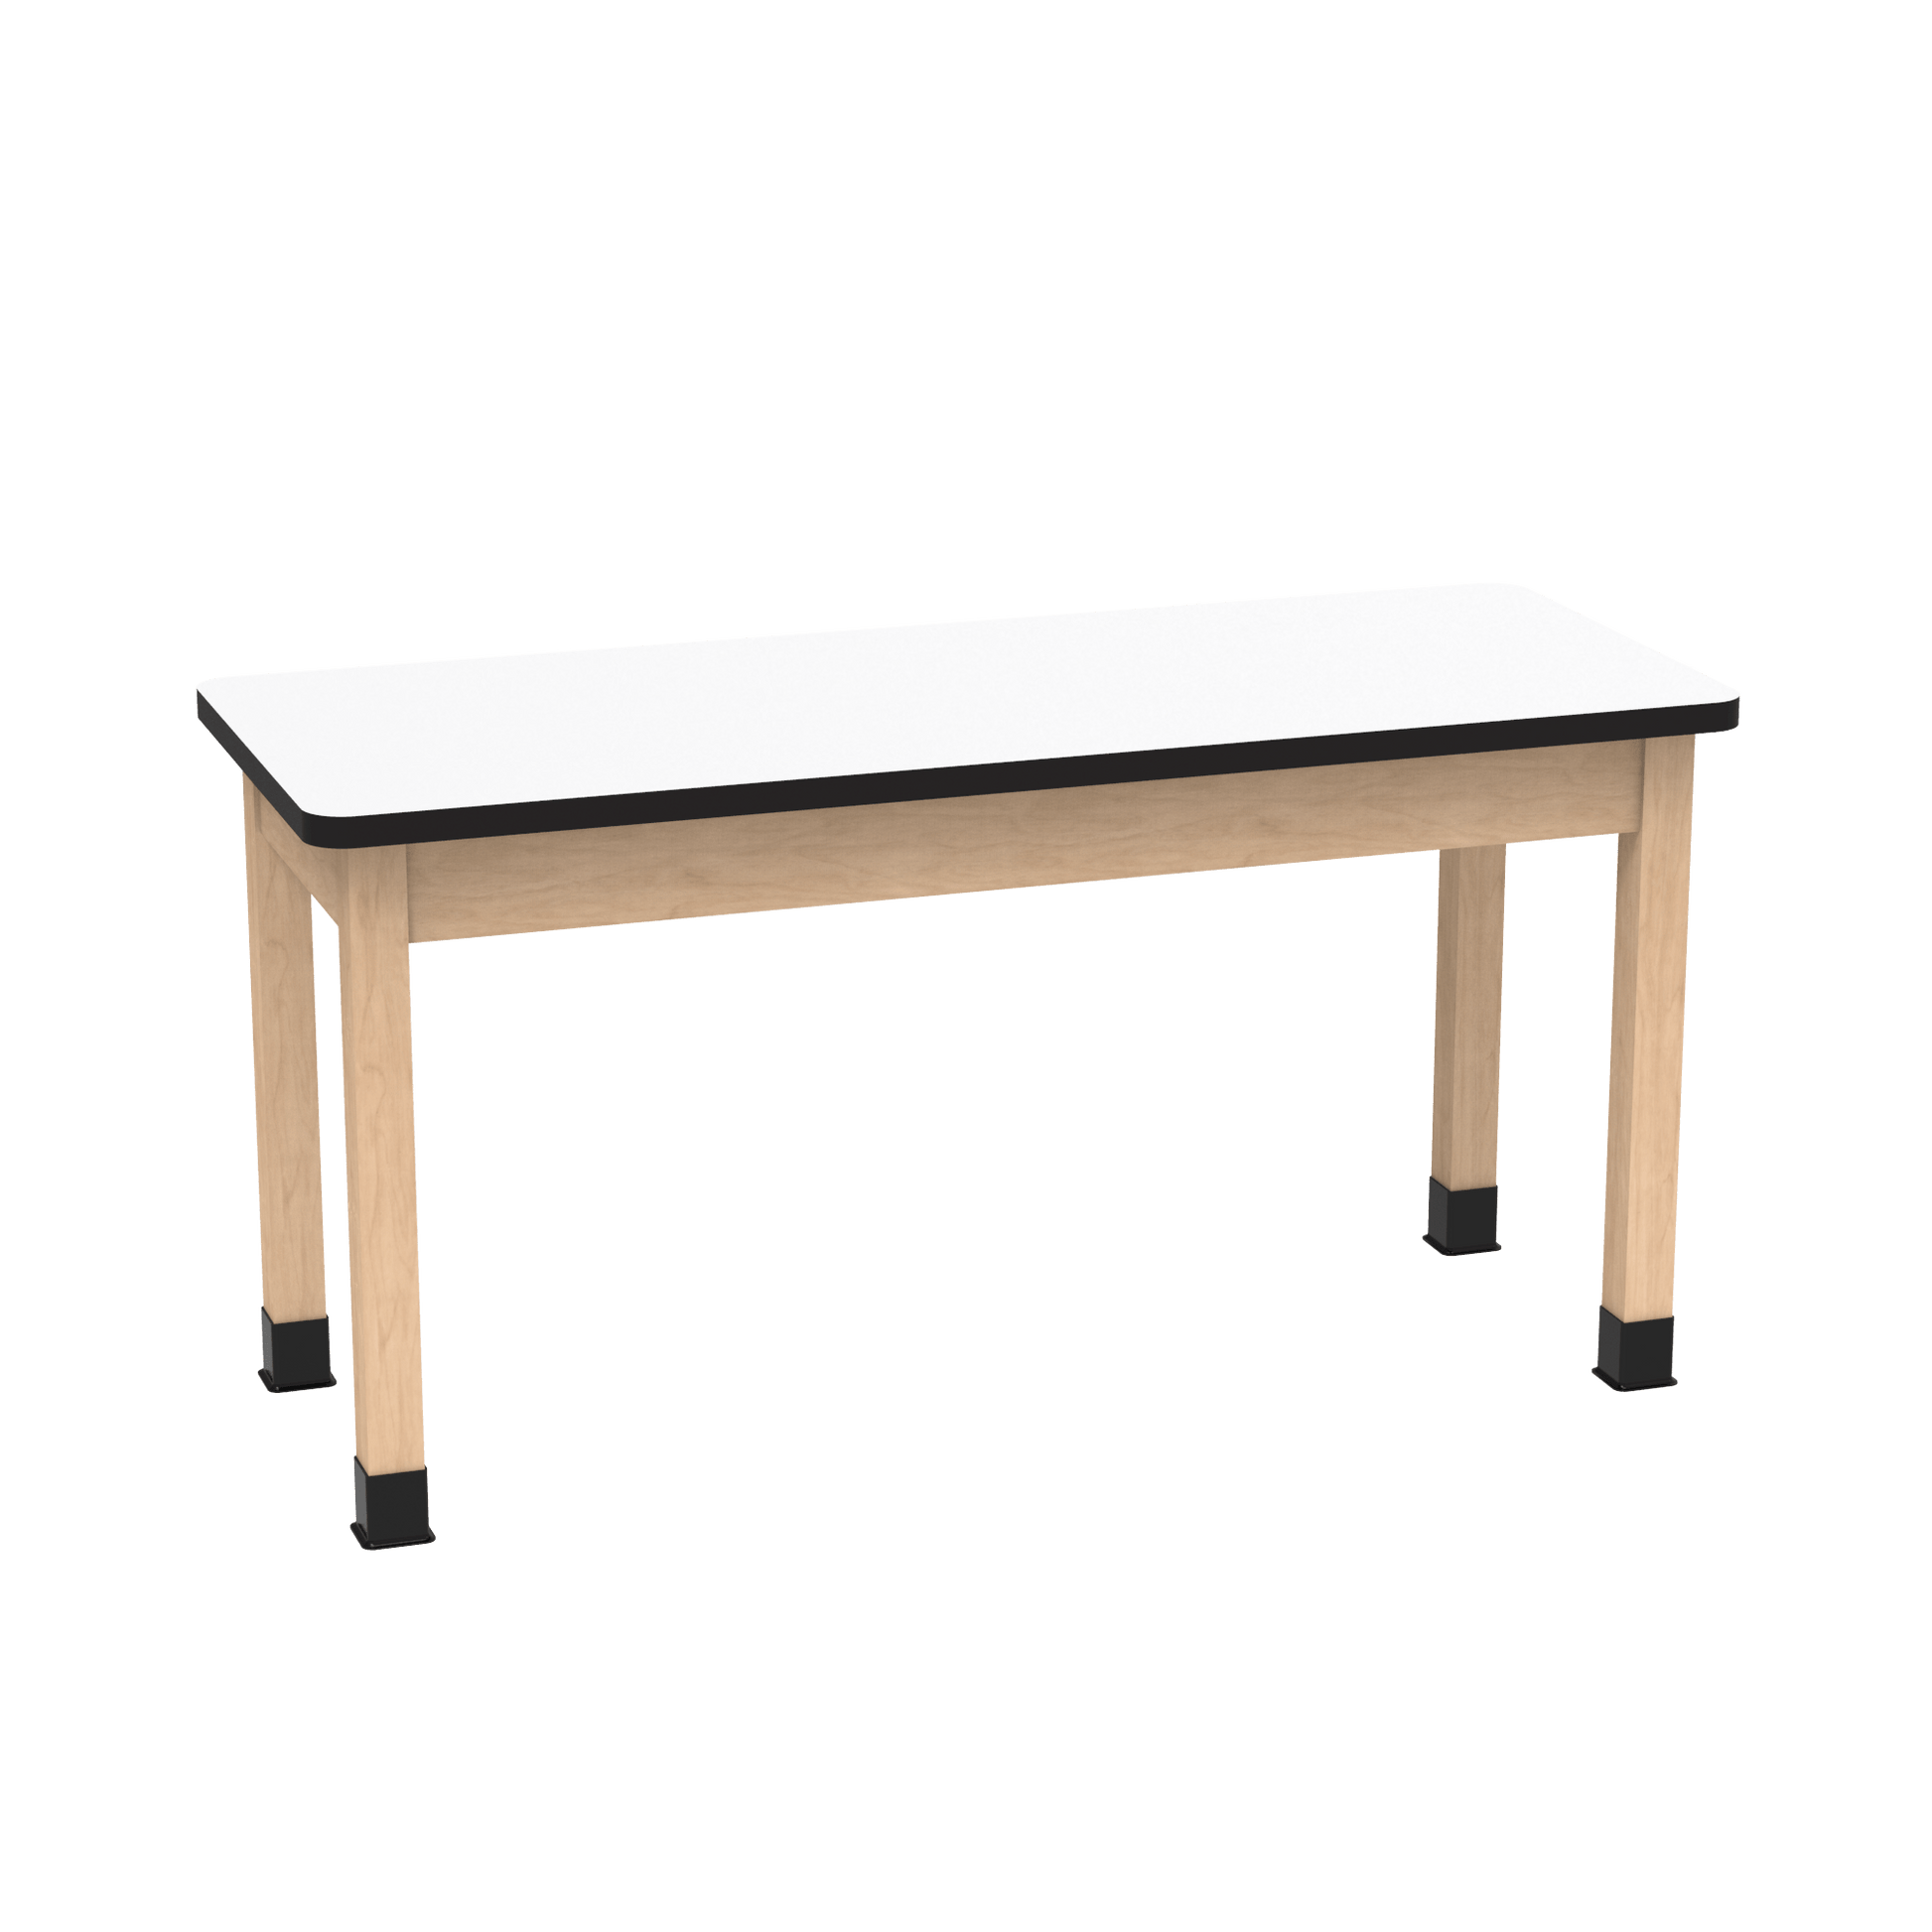 Diversified Woodcrafts Science Table - Plain Apron - 54" W x30" D - Solid Wood Frame and Adjustable Glides - SchoolOutlet